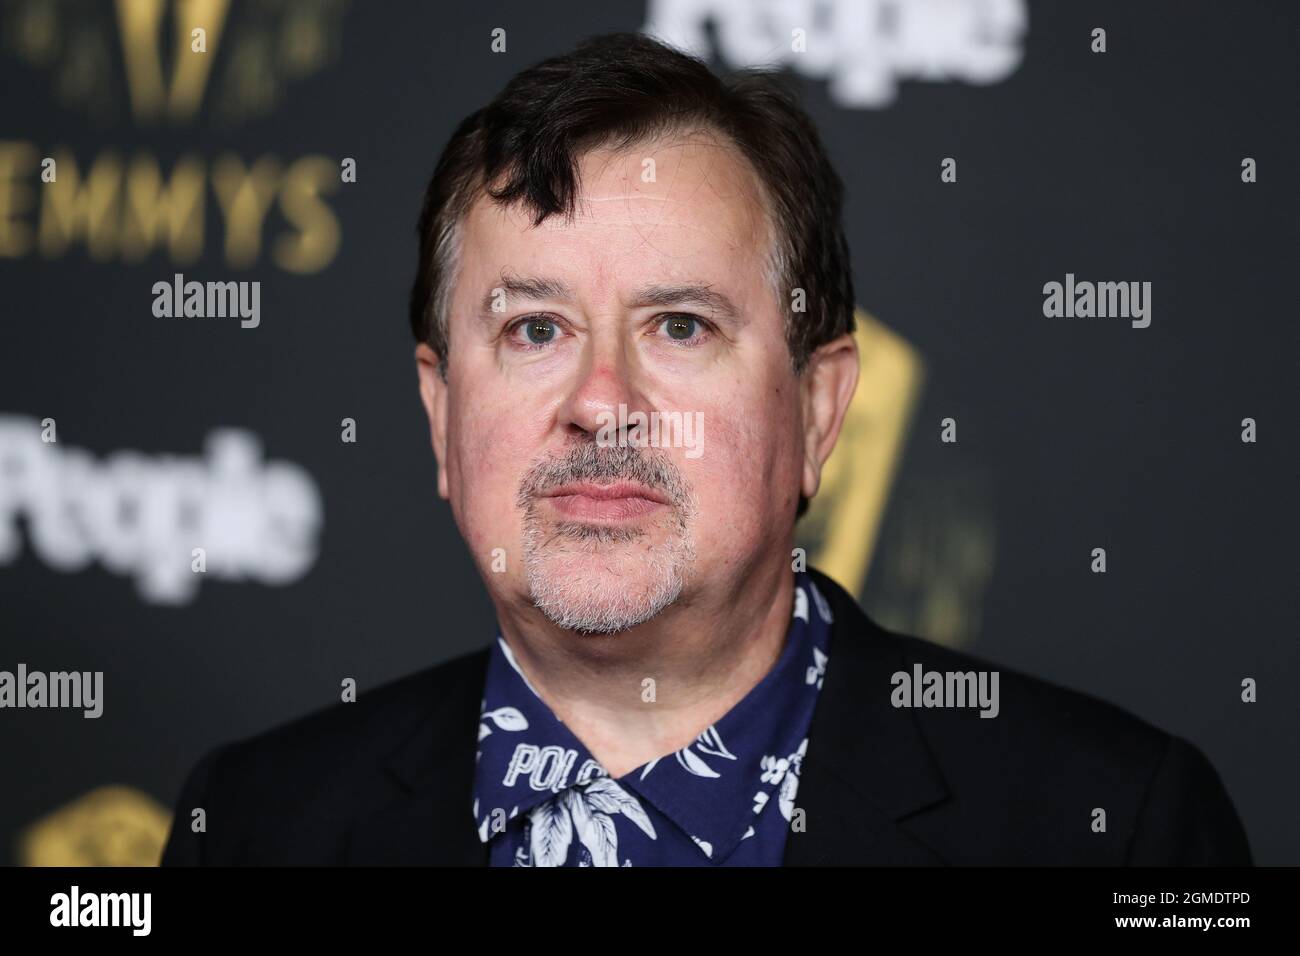 North Hollywood, USA. 17th Sep, 2021. NORTH HOLLYWOOD, LOS ANGELES, CALIFORNIA, USA - SEPTEMBER 17: Actor Jeremy Swift arrives at the Television Academy's Reception To Honor 73rd Emmy Award Nominees held at The Academy of Television Arts and Sciences on September 17, 2021 in North Hollywood, Los Angeles, California, USA. (Photo by Xavier Collin/Image Press Agency/Sipa USA) Credit: Sipa USA/Alamy Live News Stock Photo